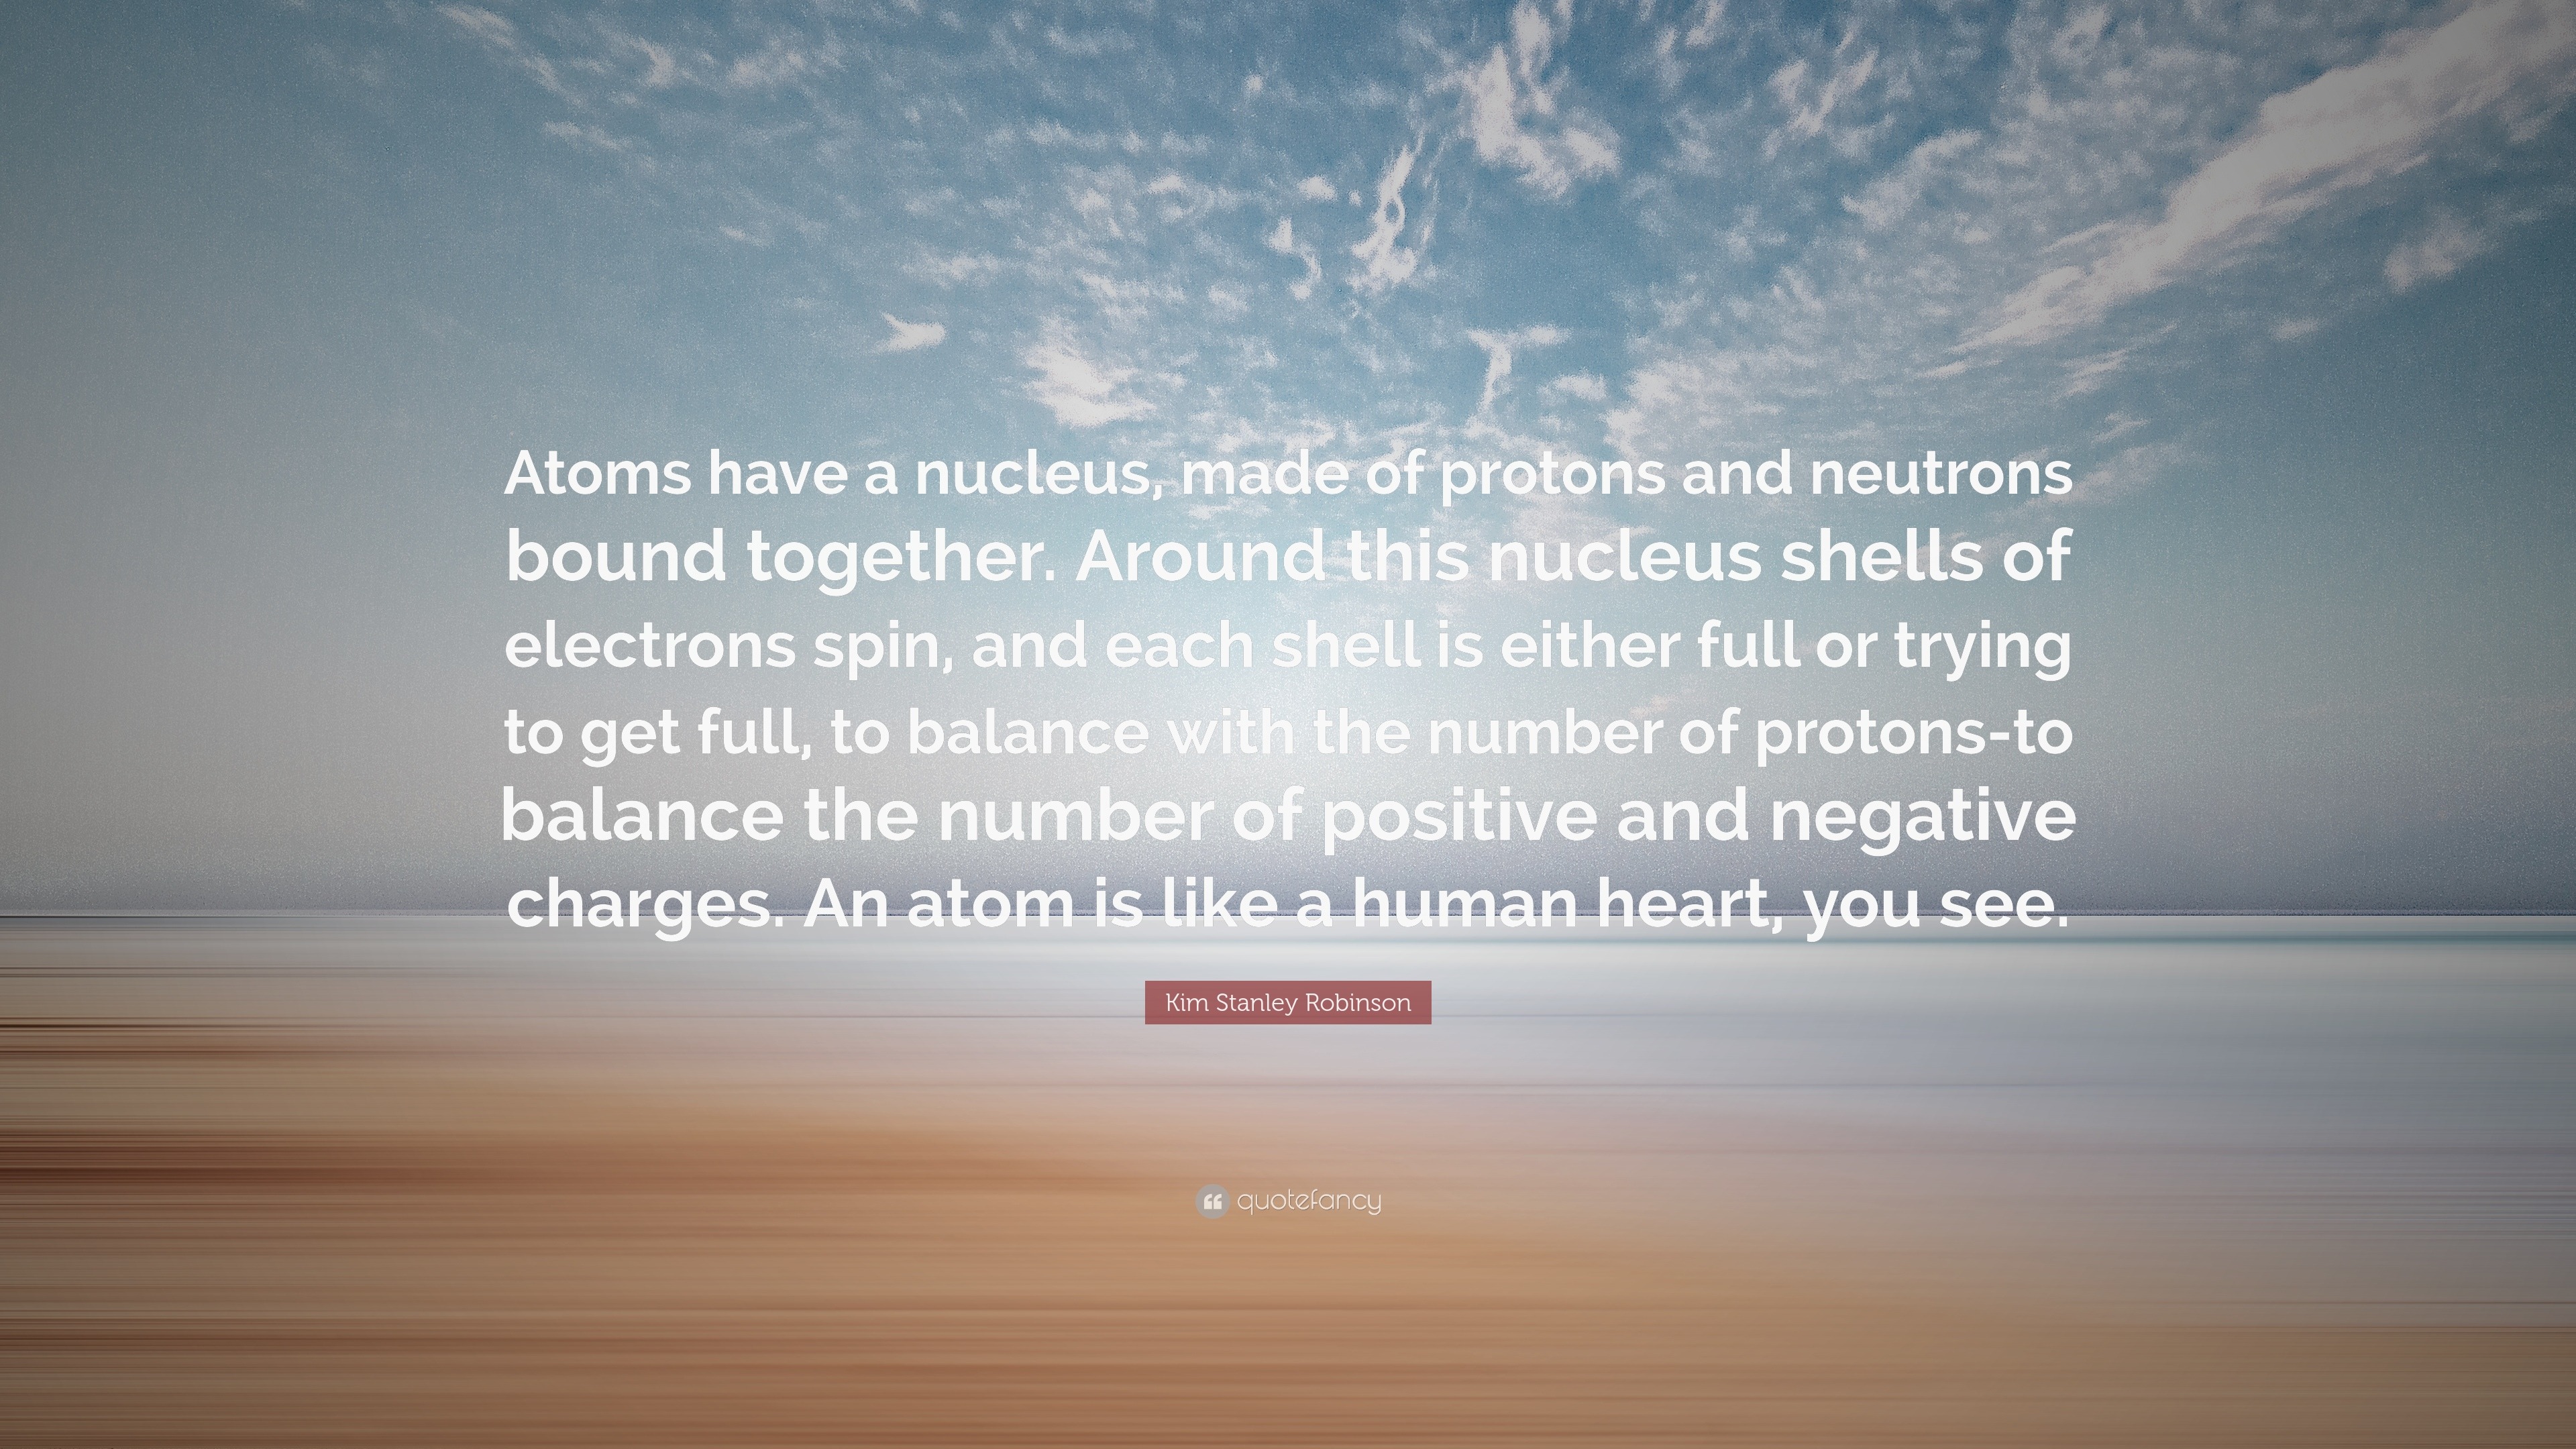 Kim Stanley Robinson Quote: “Atoms have a nucleus, made of protons and ...